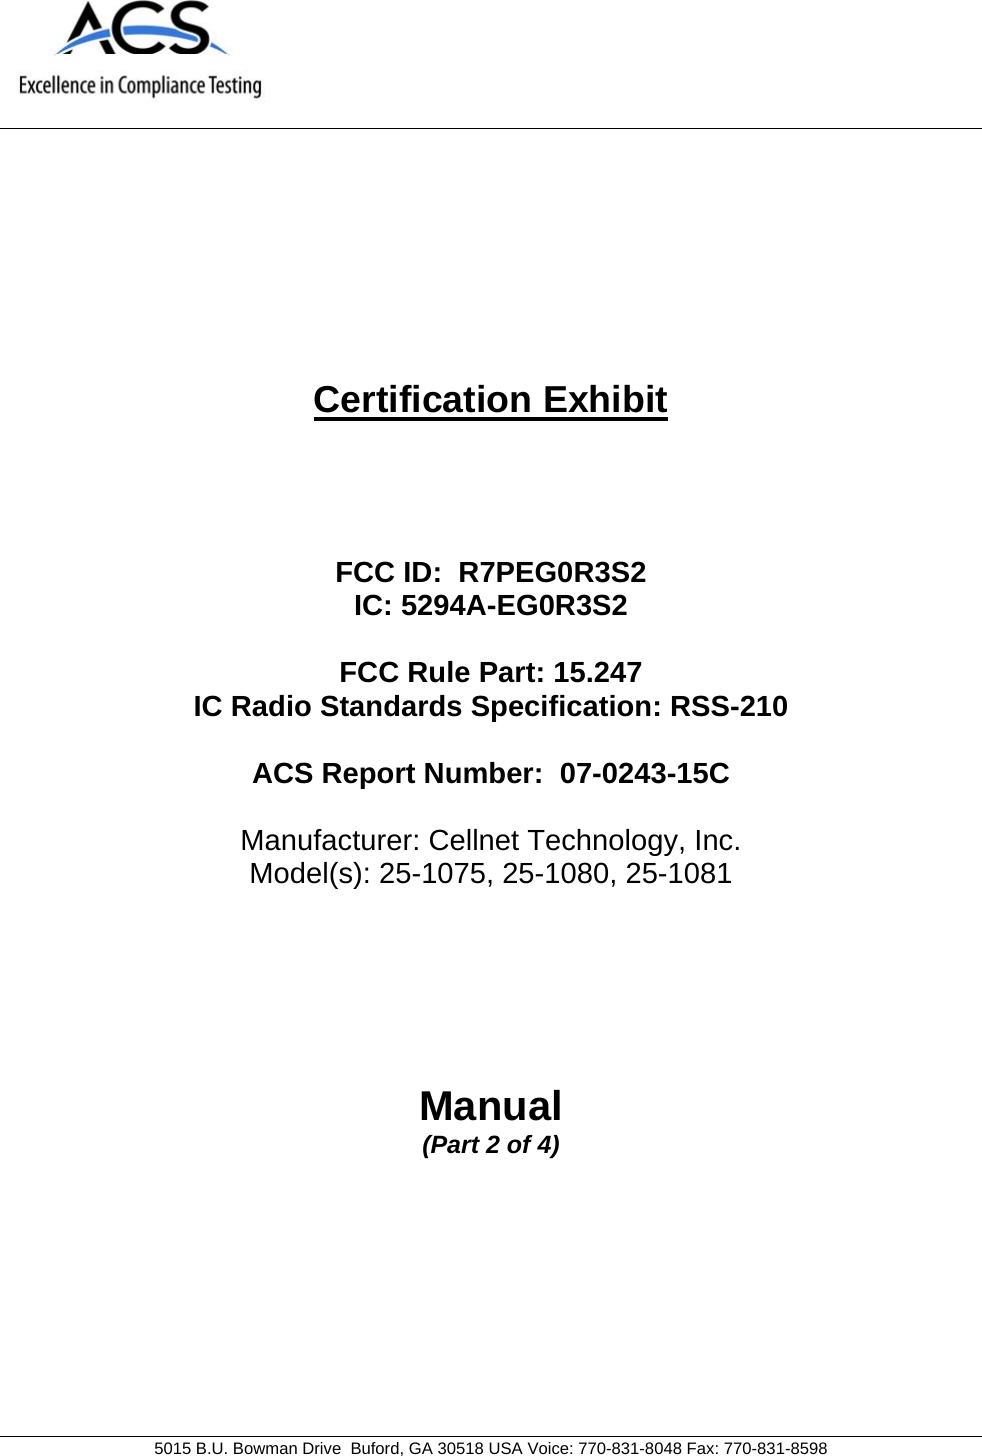     5015 B.U. Bowman Drive  Buford, GA 30518 USA Voice: 770-831-8048 Fax: 770-831-8598   Certification Exhibit     FCC ID:  R7PEG0R3S2 IC: 5294A-EG0R3S2  FCC Rule Part: 15.247 IC Radio Standards Specification: RSS-210  ACS Report Number:  07-0243-15C   Manufacturer: Cellnet Technology, Inc. Model(s): 25-1075, 25-1080, 25-1081     Manual (Part 2 of 4)  